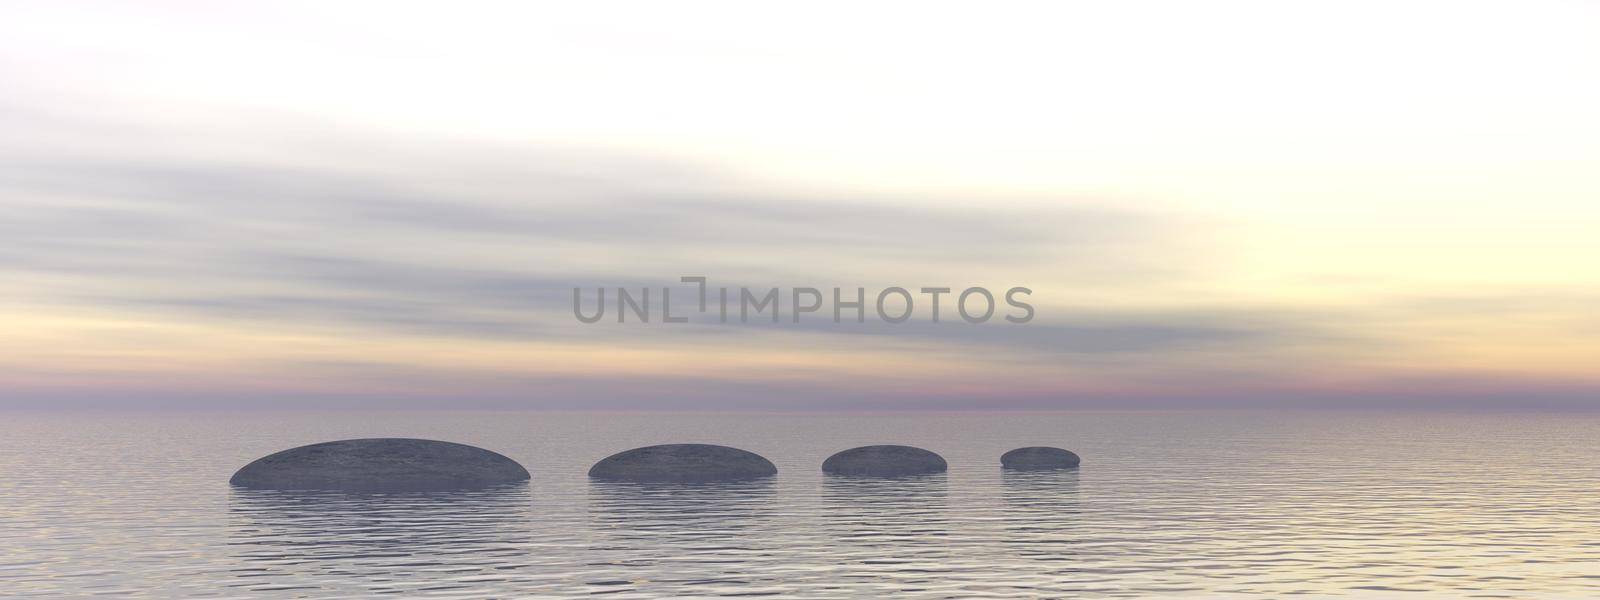 beautiful meditation landscape on the ocean - 3d rendering by mariephotos